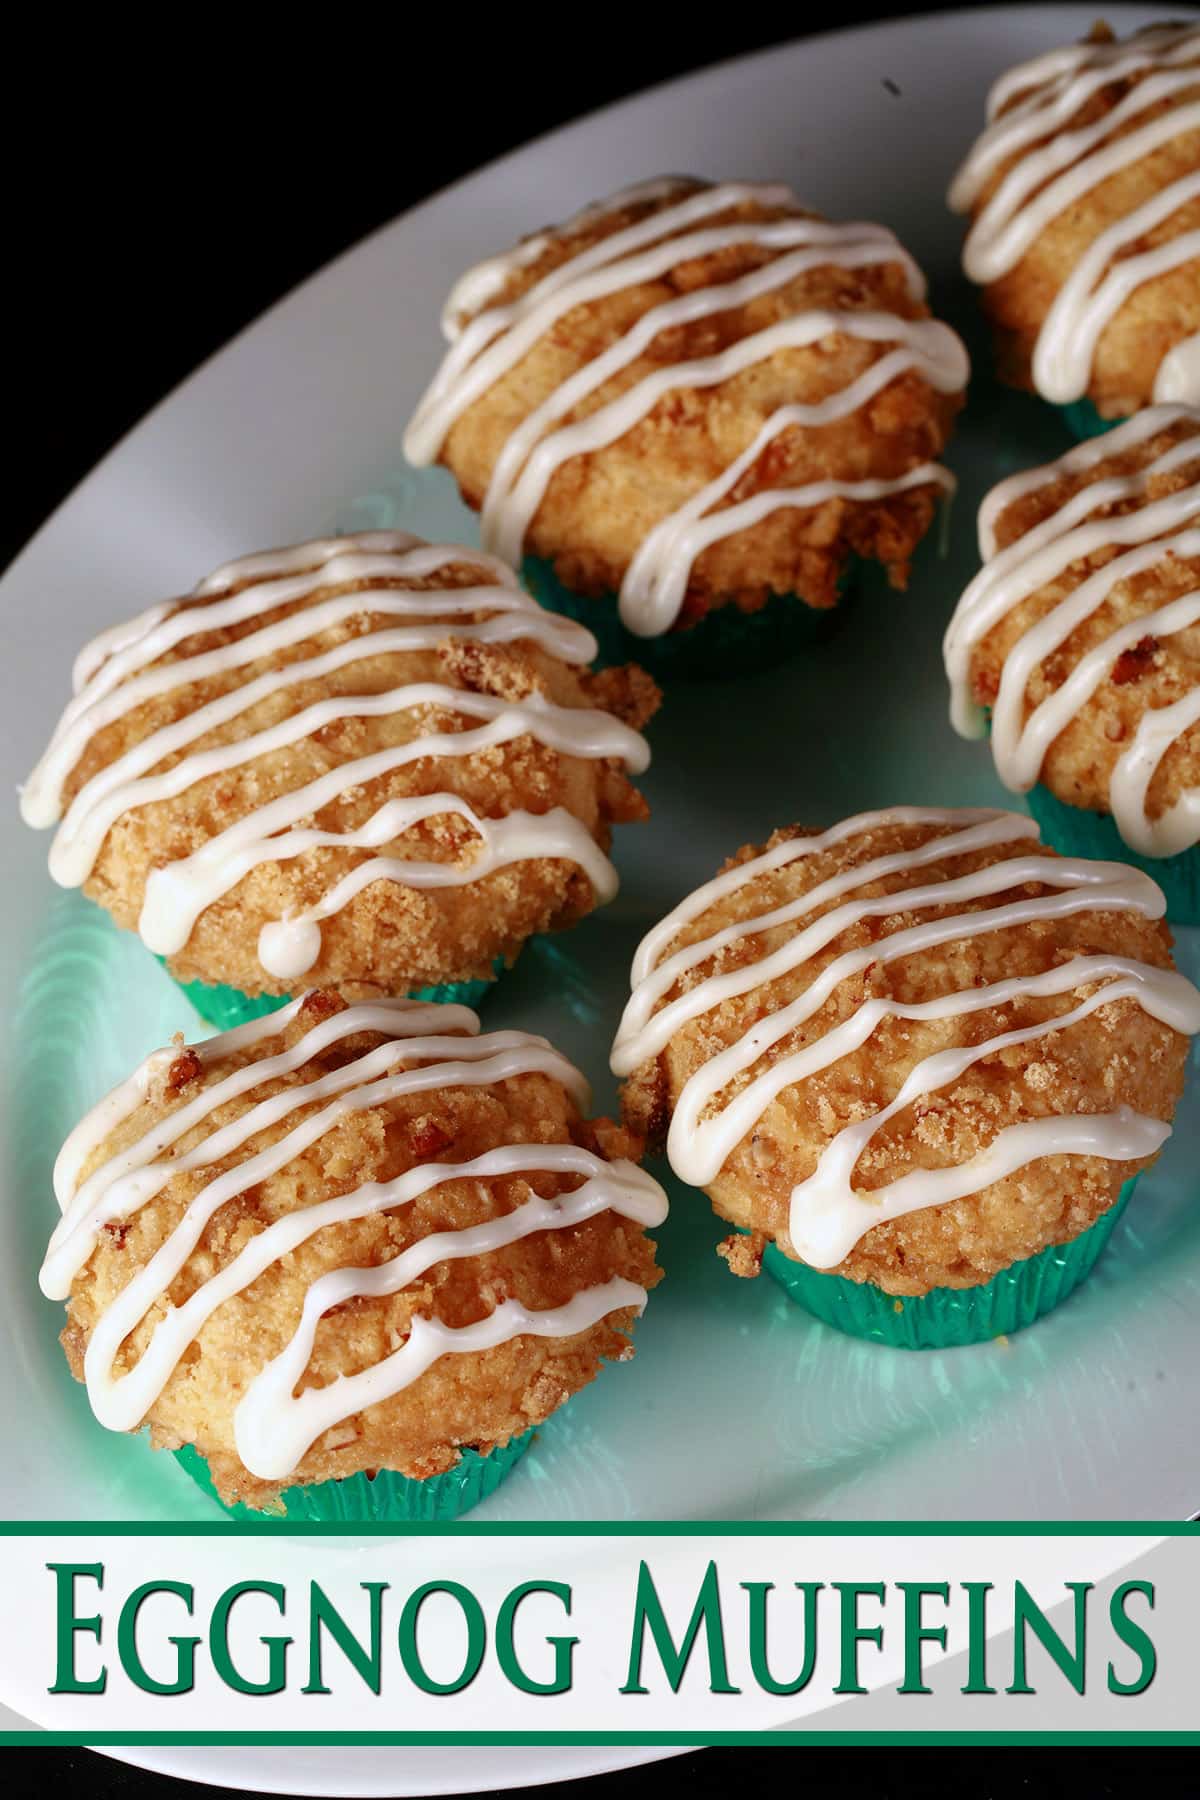 A plate of eggnog muffins, with pecan streusel and drizzled glaze.